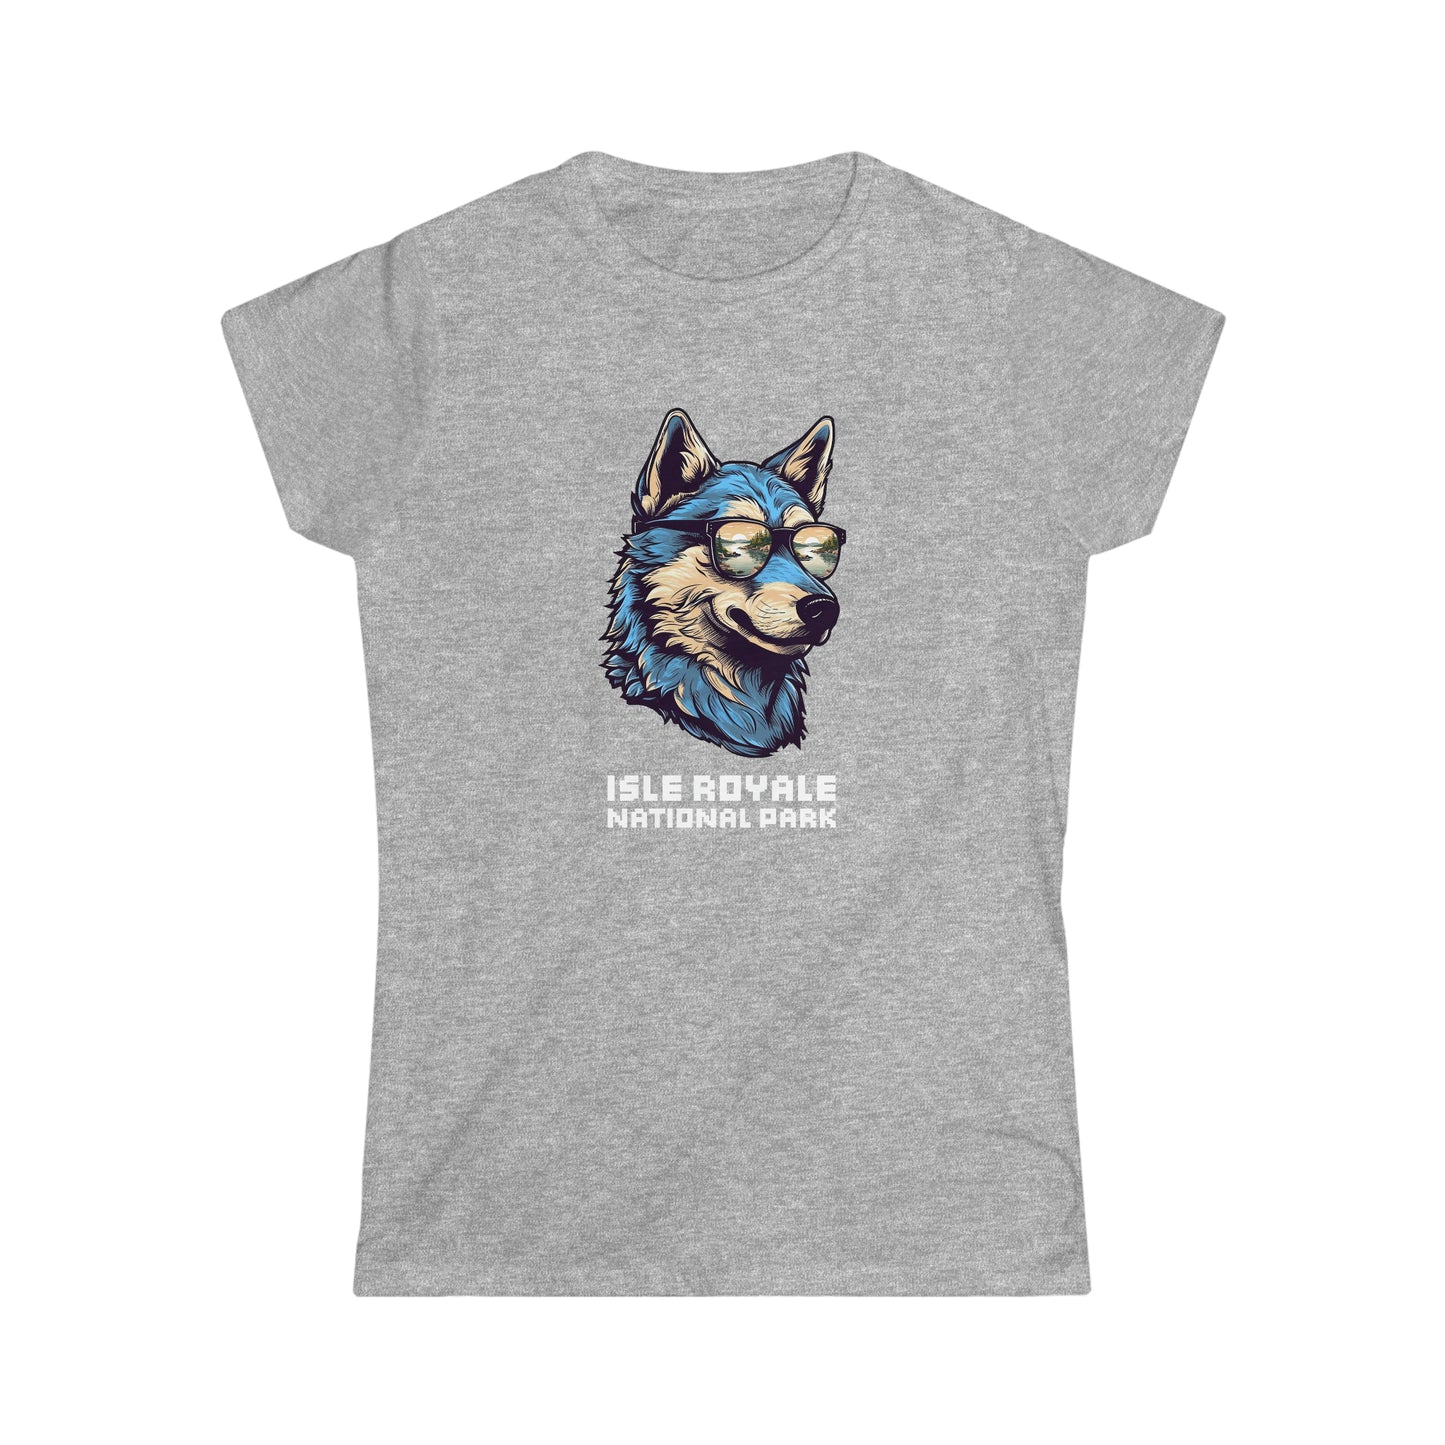 Isle Royale National Park Women's T-Shirt - Cool Wolf